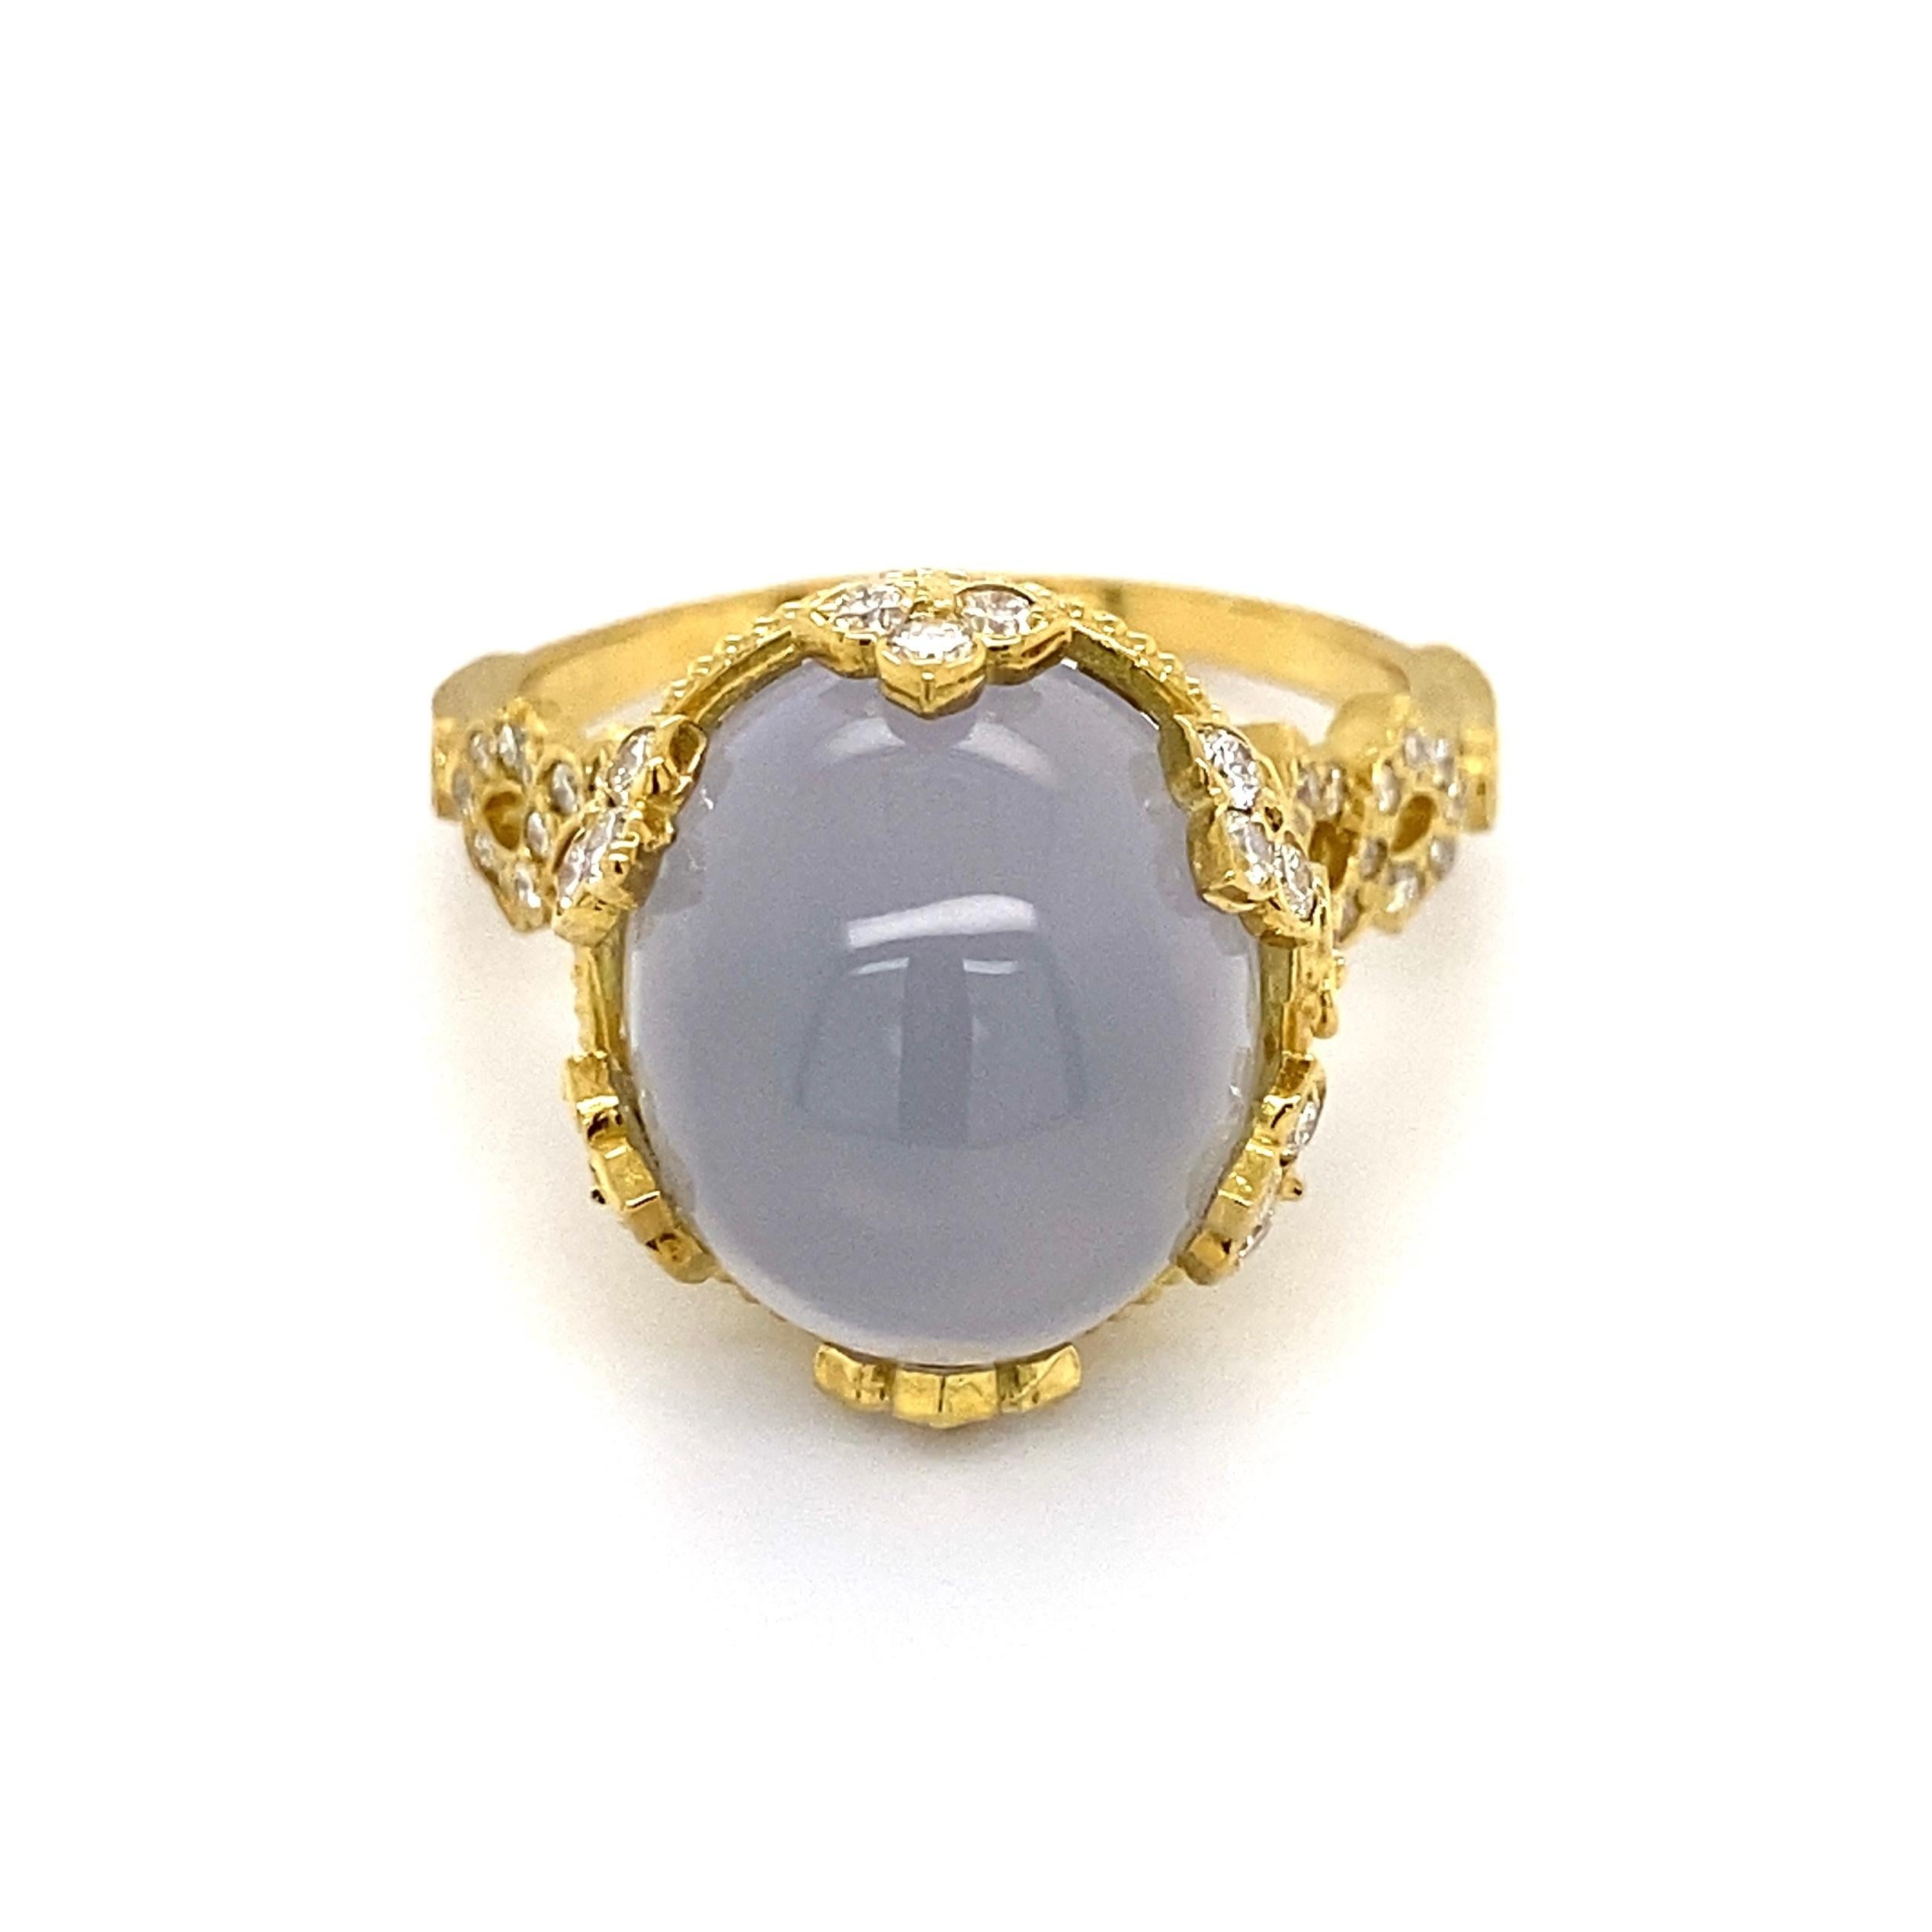 12 Carat Blue Chalcedony Diamond Designer Stambolian Ring Estate Fine Jewelry In Excellent Condition For Sale In Montreal, QC